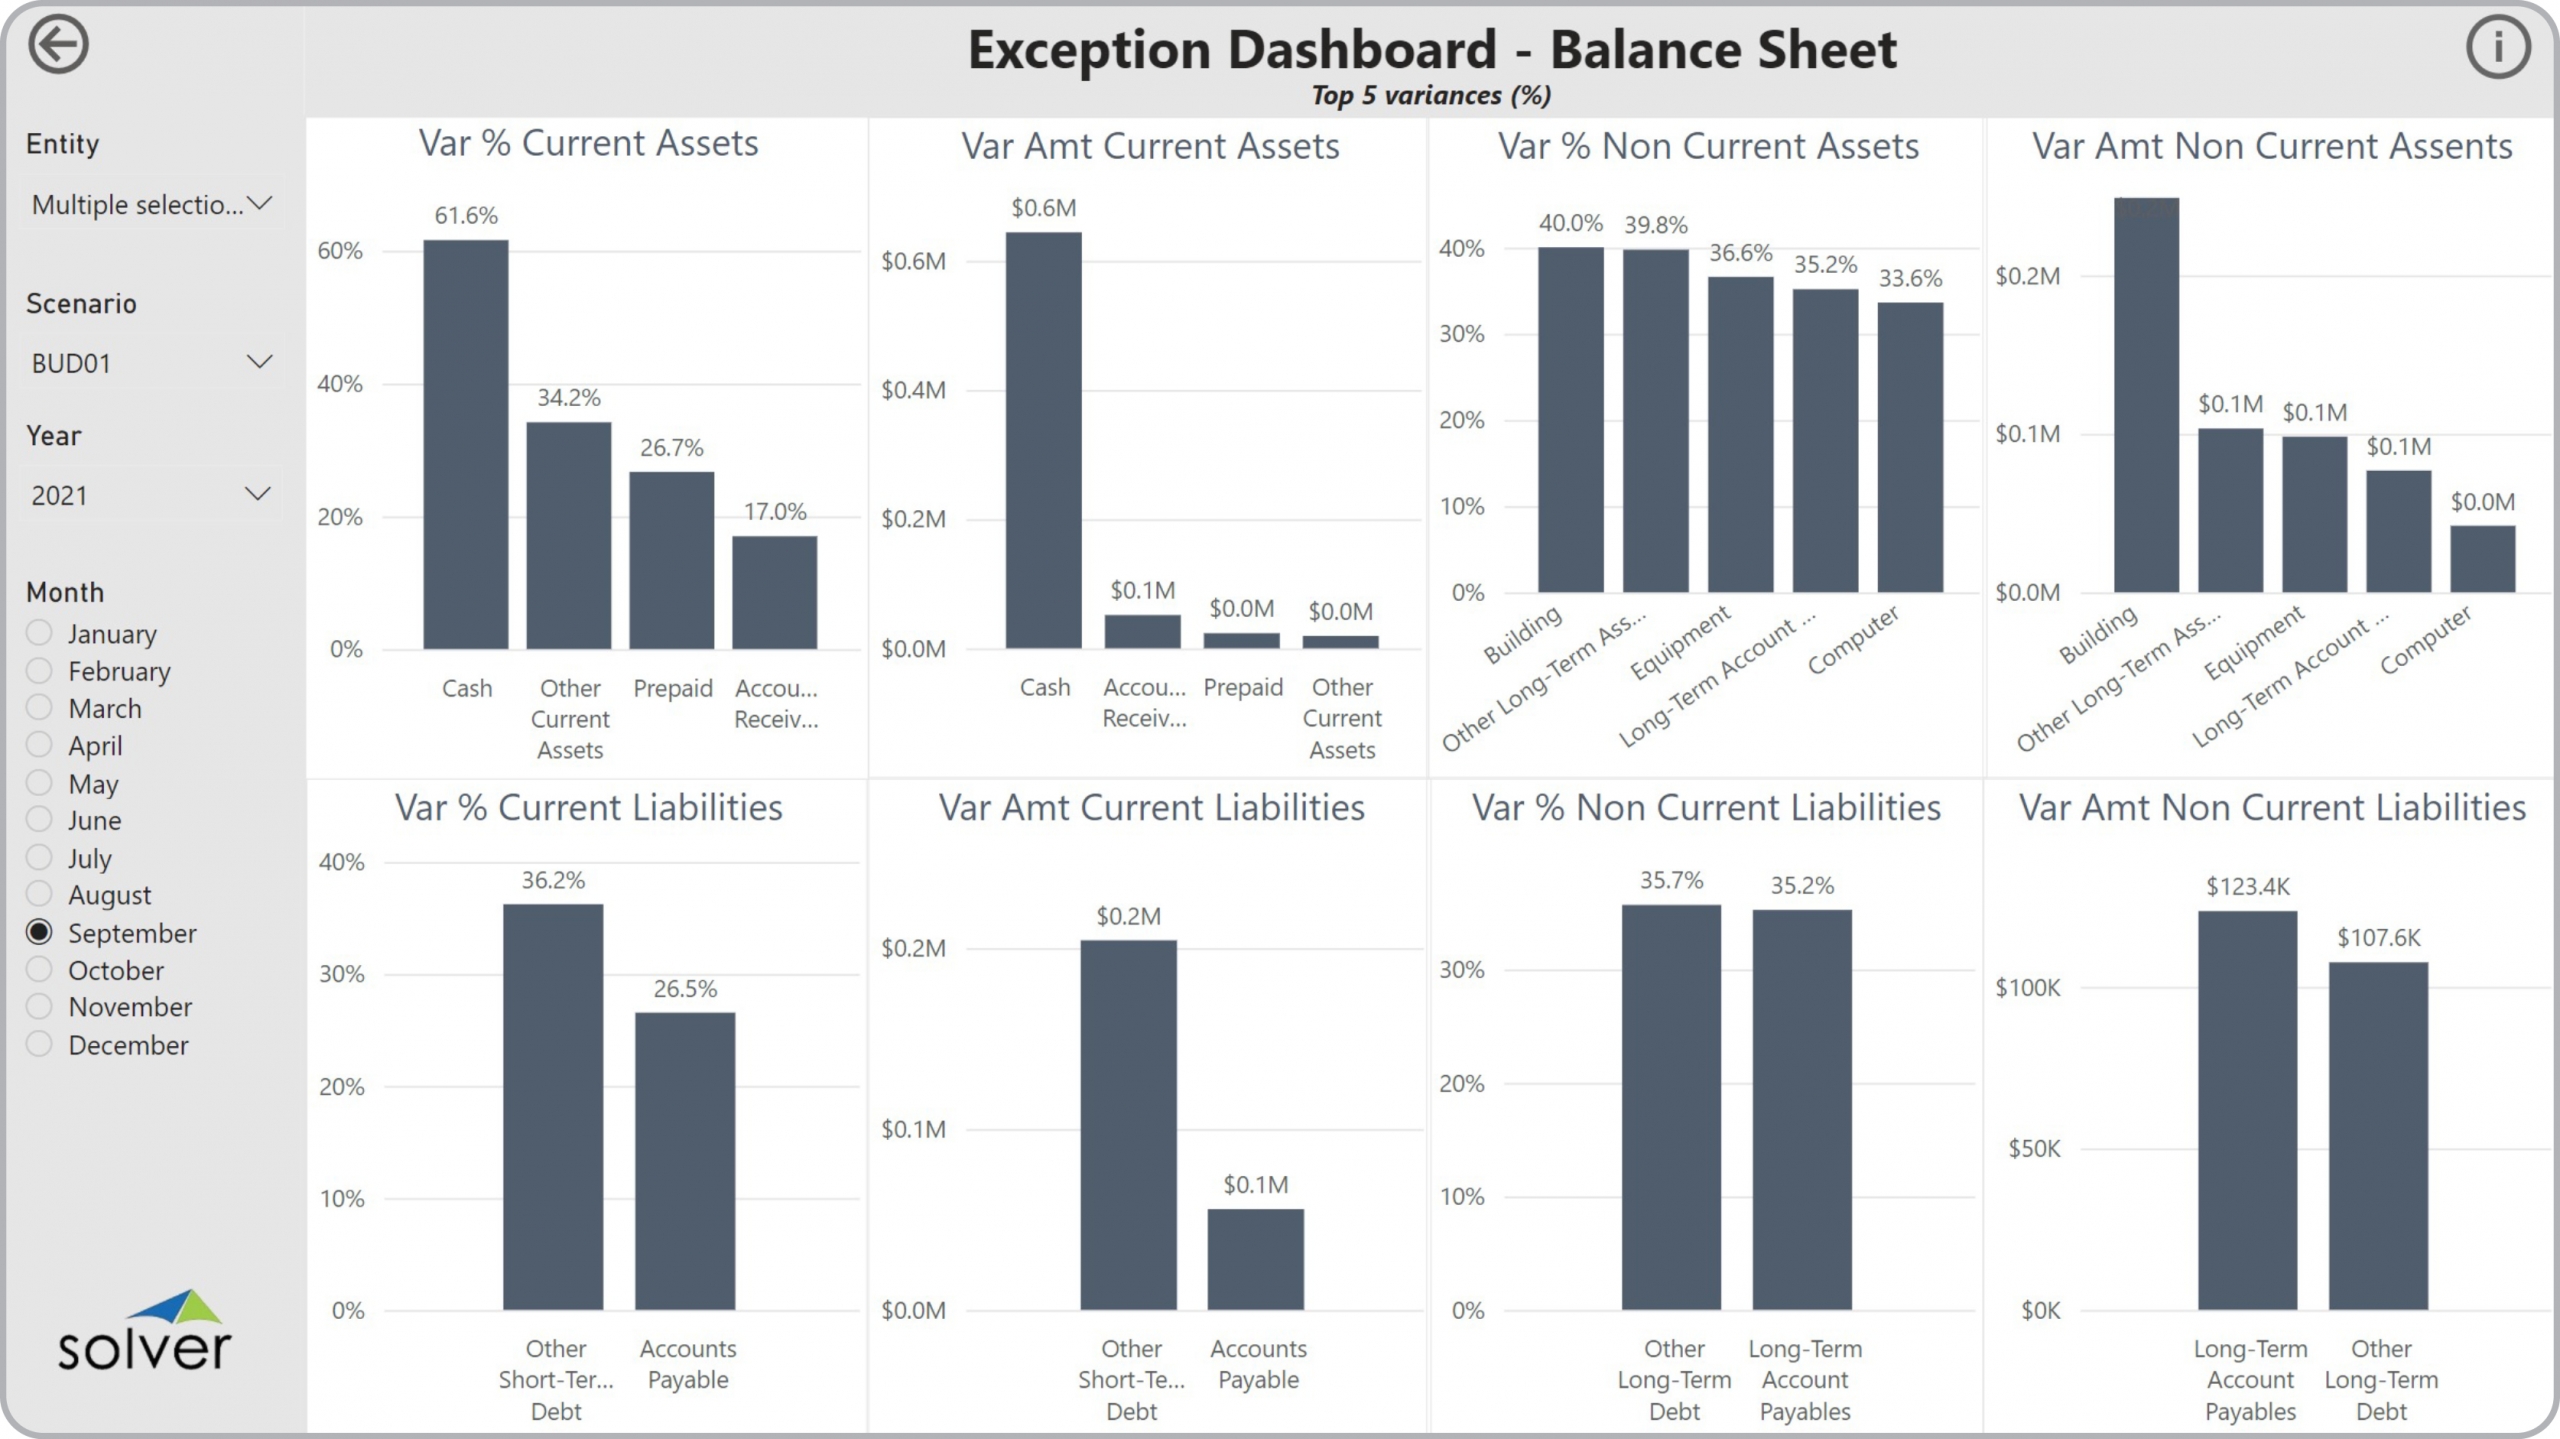 Example of an Balance Sheet Exception Dashboard to Streamline the Monthly Analysis Process